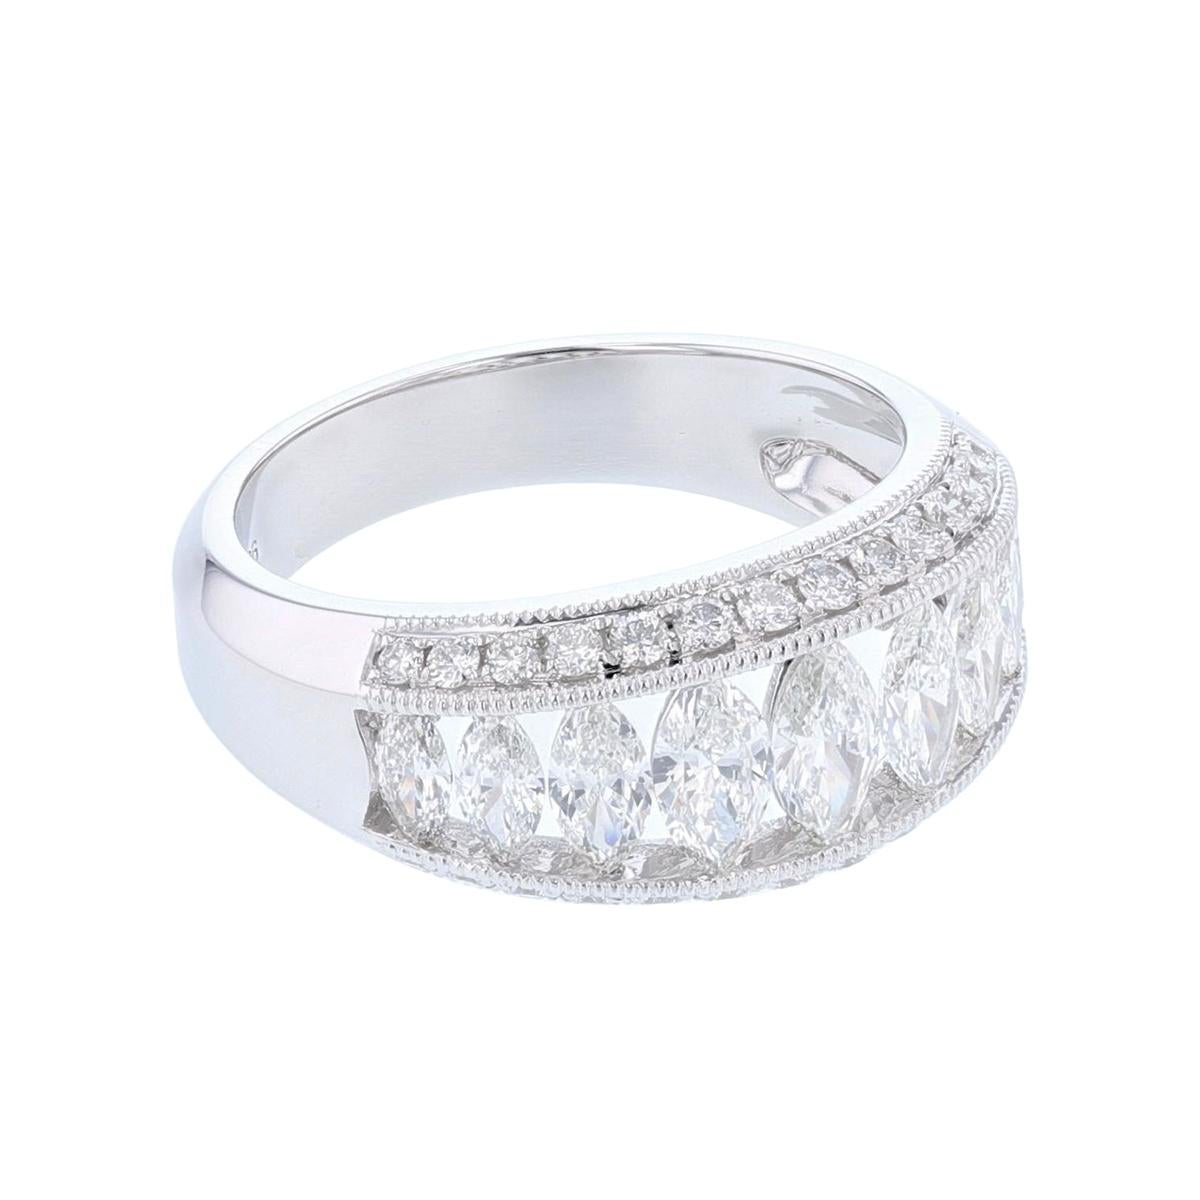 The ring is made in 18k white gold and features 9 Marquise cut, diamonds, channel set weighing 1.14cts and 28 round cut, prong set Diamonds weighing 0.35cts with a color grade (I) and clarity grade (SI1). 